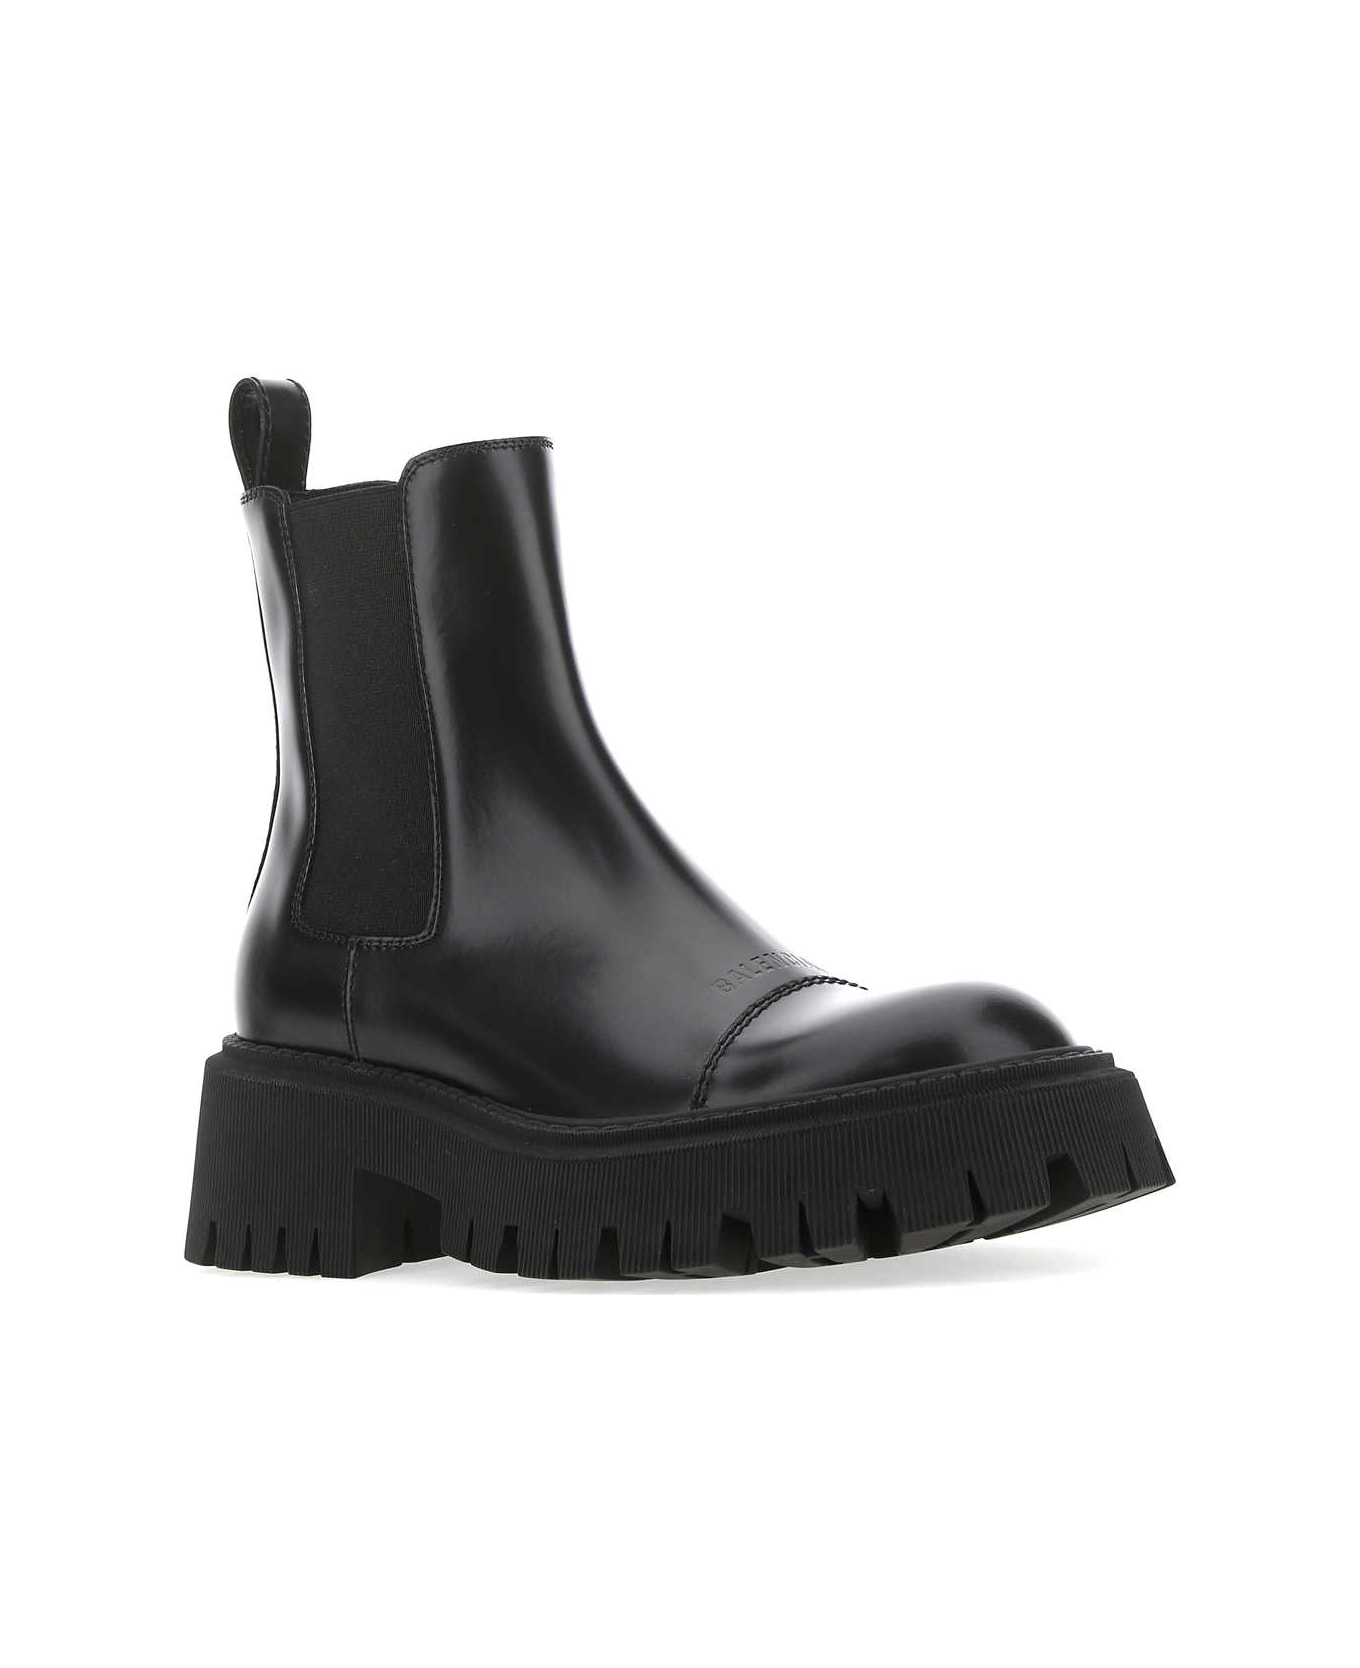 Balenciaga Black Leather Tractor Ankle Boots - BLACK ブーツ